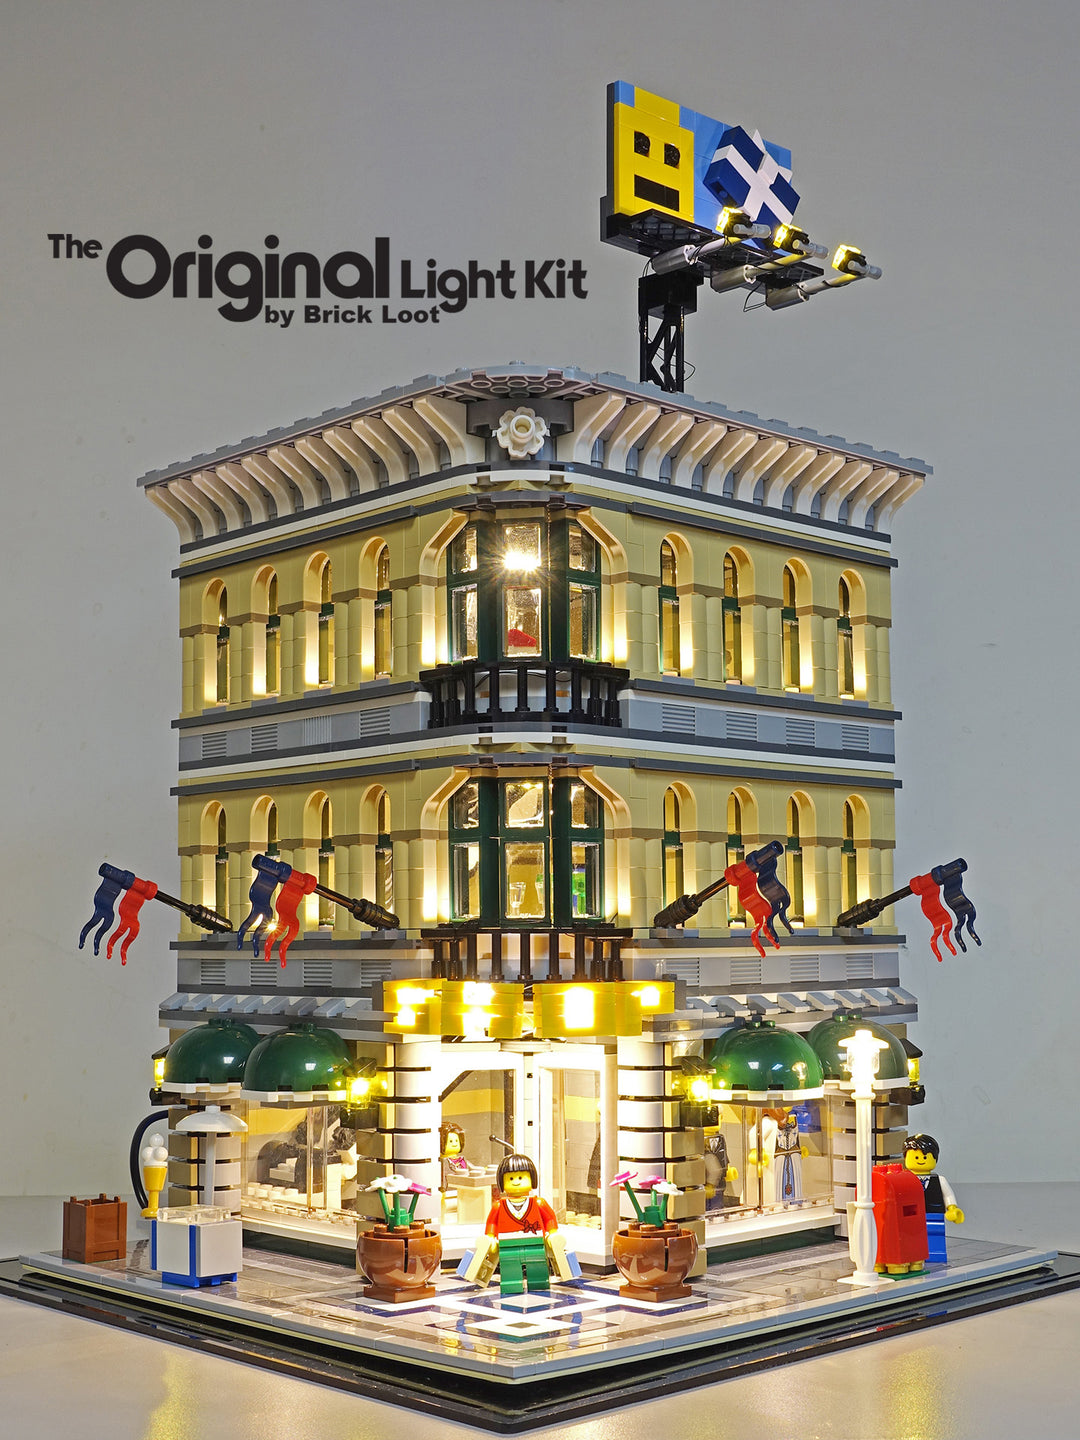 LEGO Grand Emporium set 10211 with the Brick Loot LED Light Kit installed. Brilliant day or night.